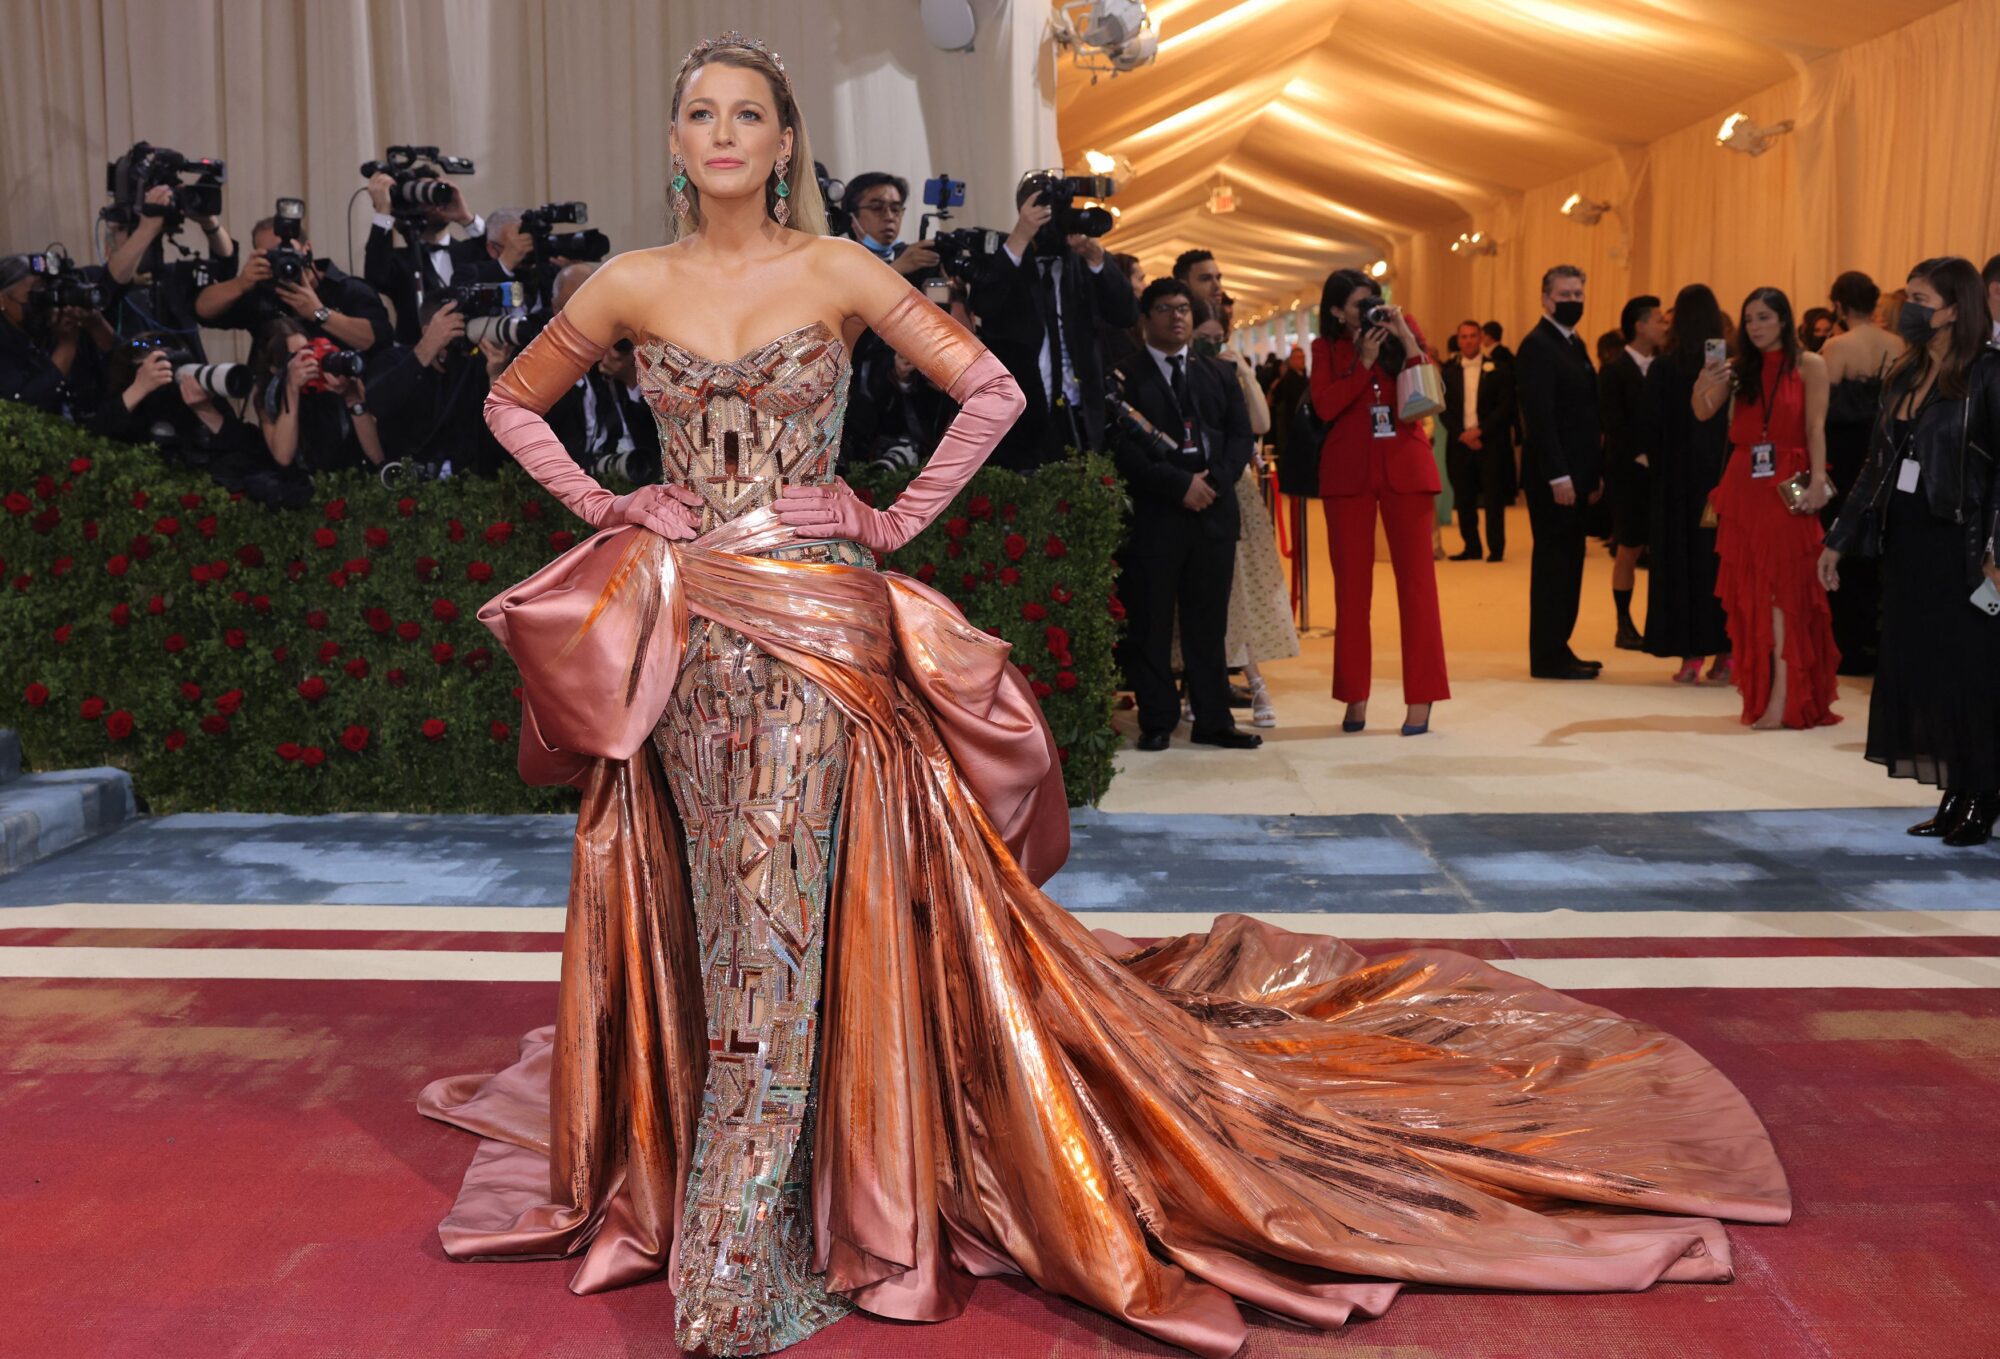 Blake Lively arrives at the In America: An Anthology of Fashion themed Met Gala at the Metropolitan Museum of Art in New York City, New York, U.S., May 2, 2022. REUTERS/Andrew Kelly